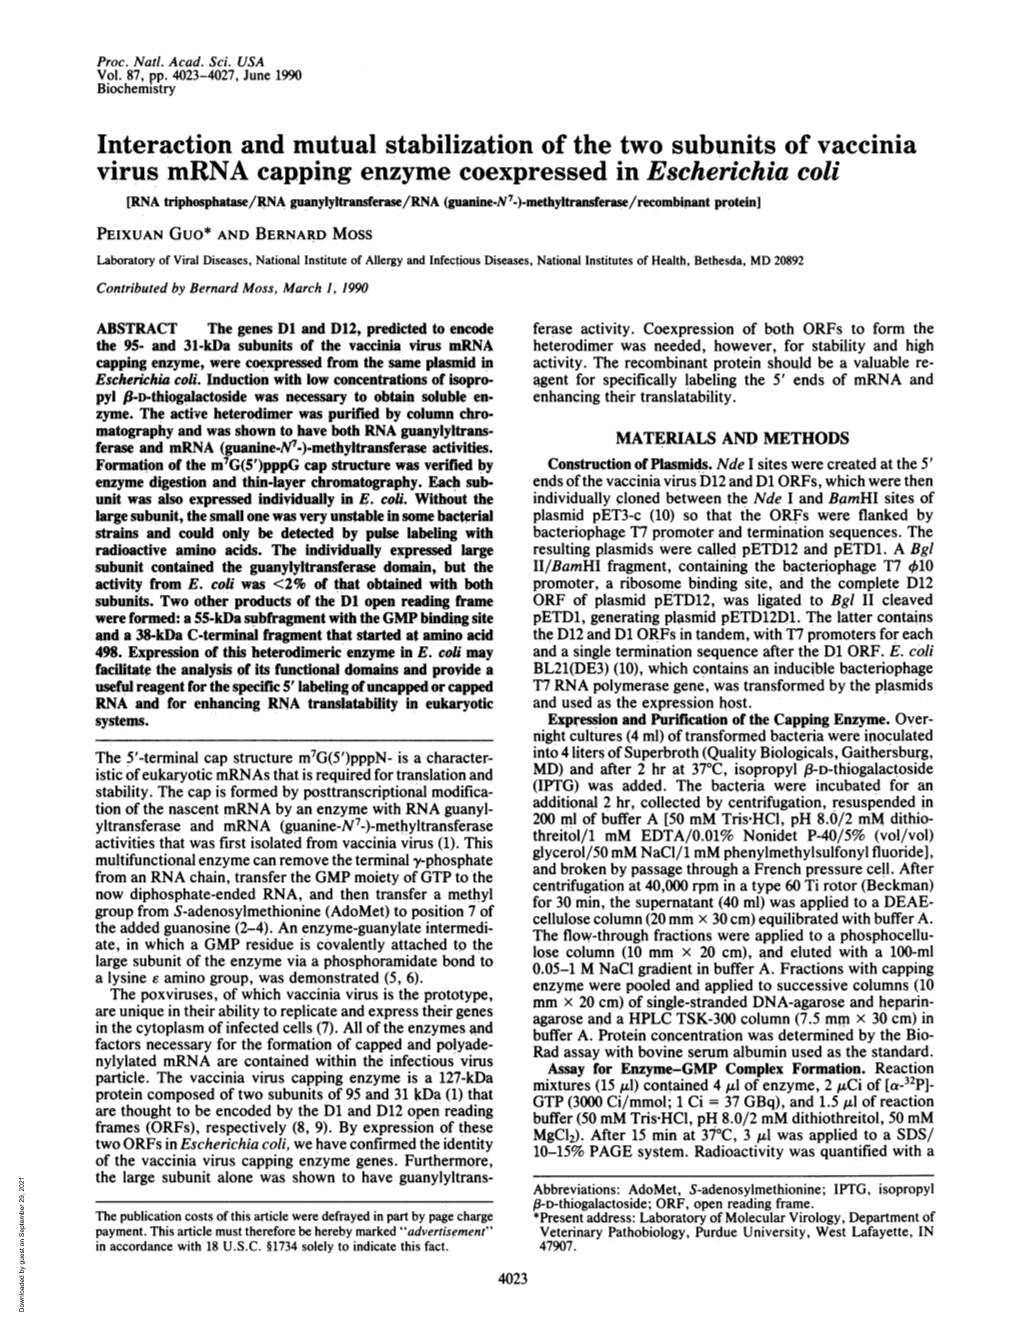 Interaction and Mutual Stabilization of the Two Subunits of Vaccinia Virus Mrna Capping Enzyme Coexpressed in Escherichia Coli